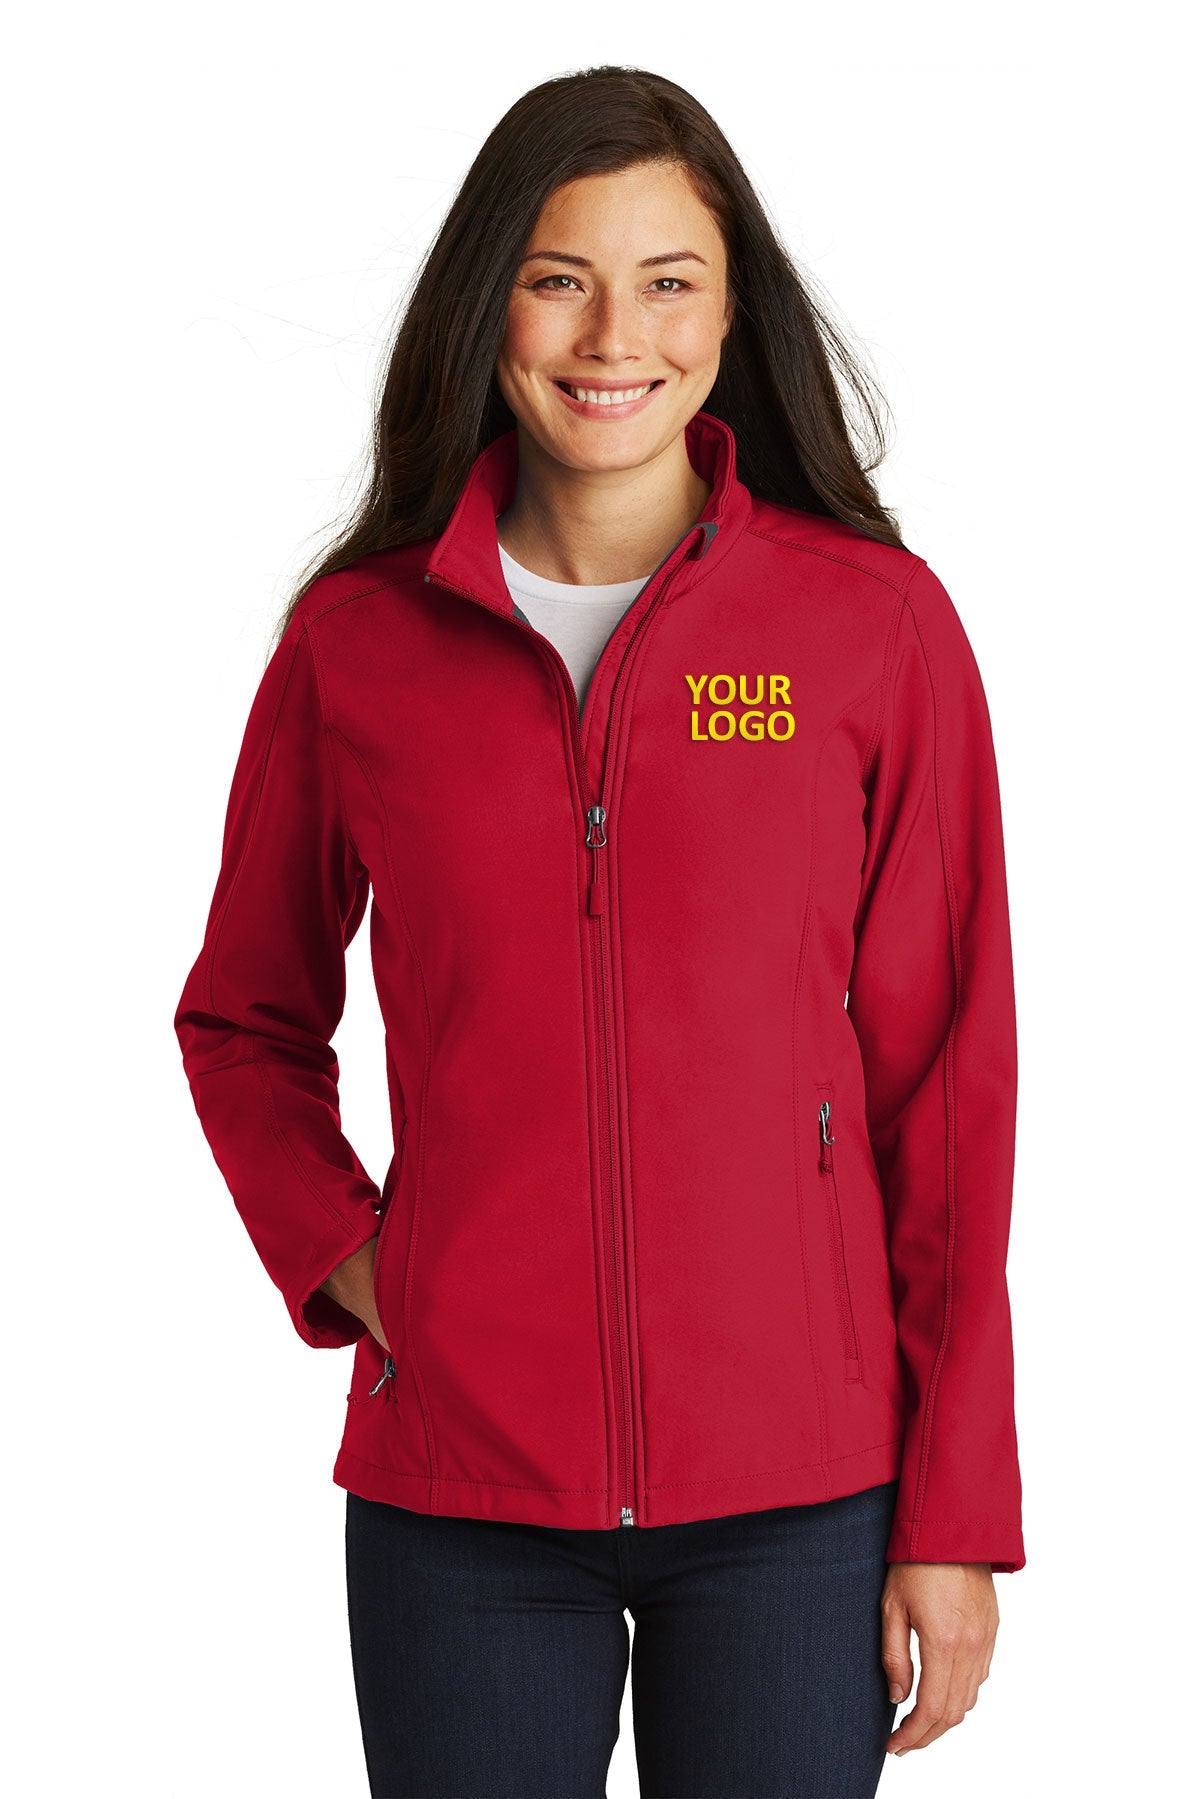 port authority rich red l317 company logo jackets